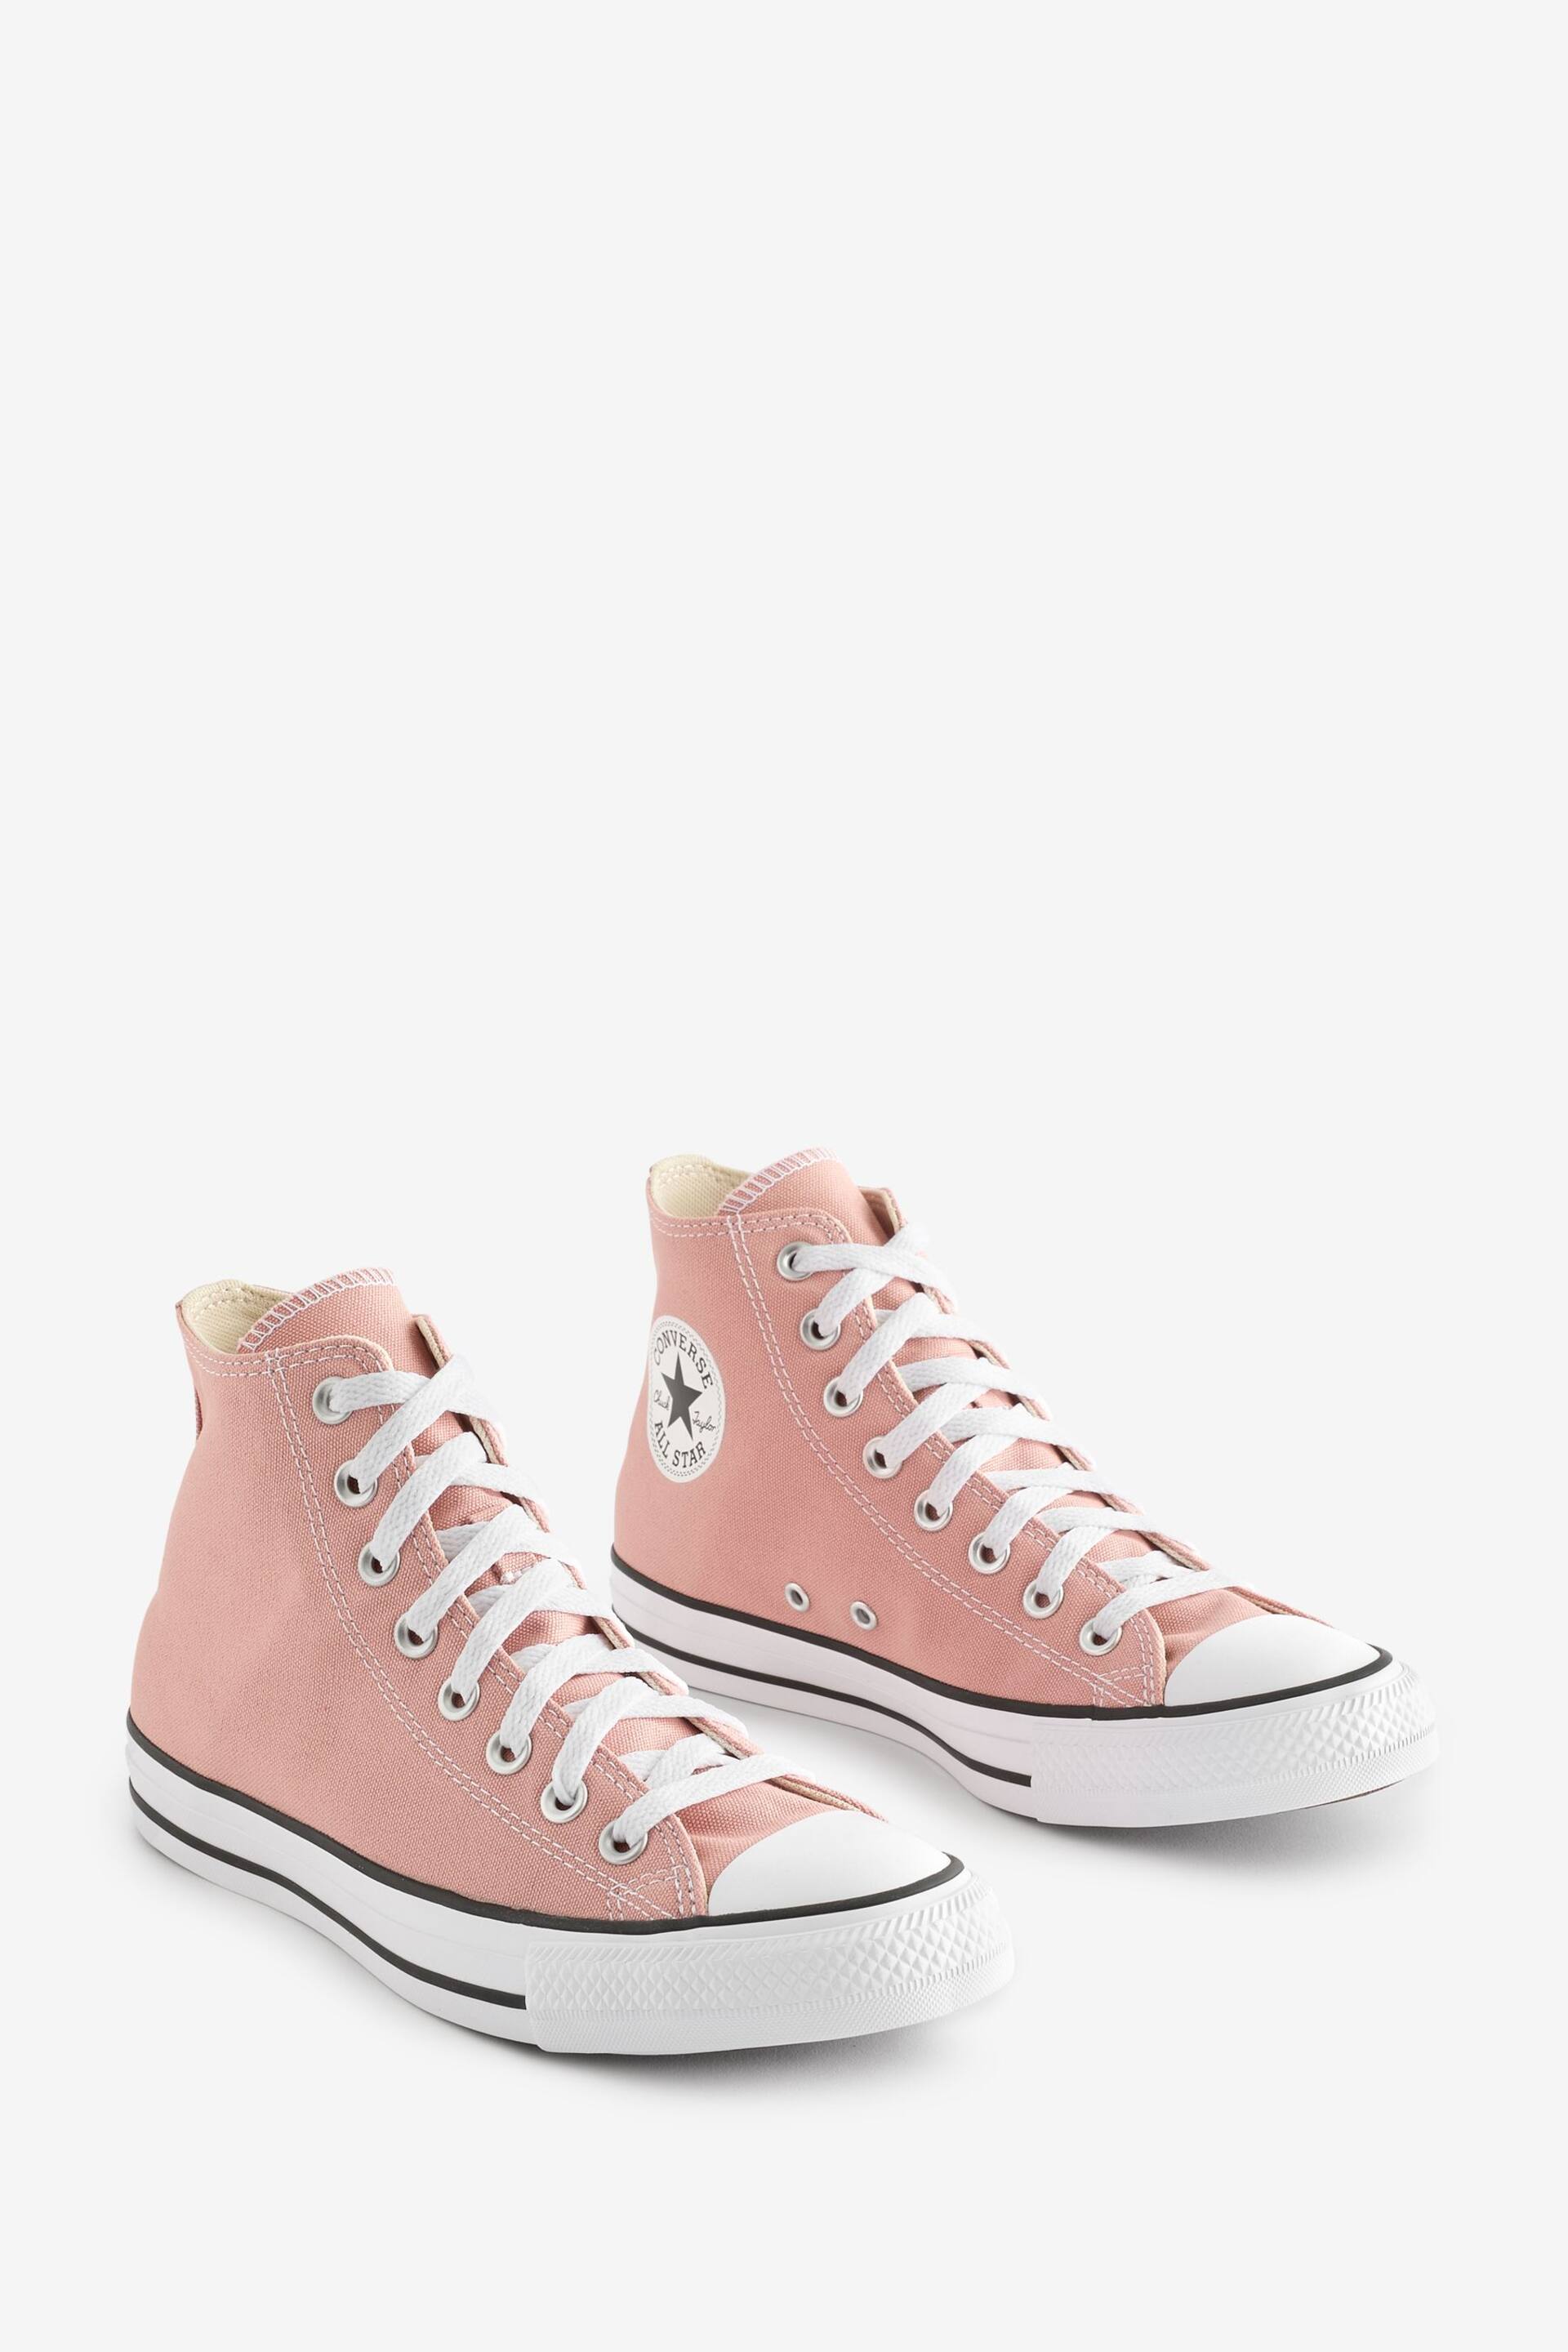 Converse Light Pink Chuck Taylor All Star High Trainers - Image 6 of 9